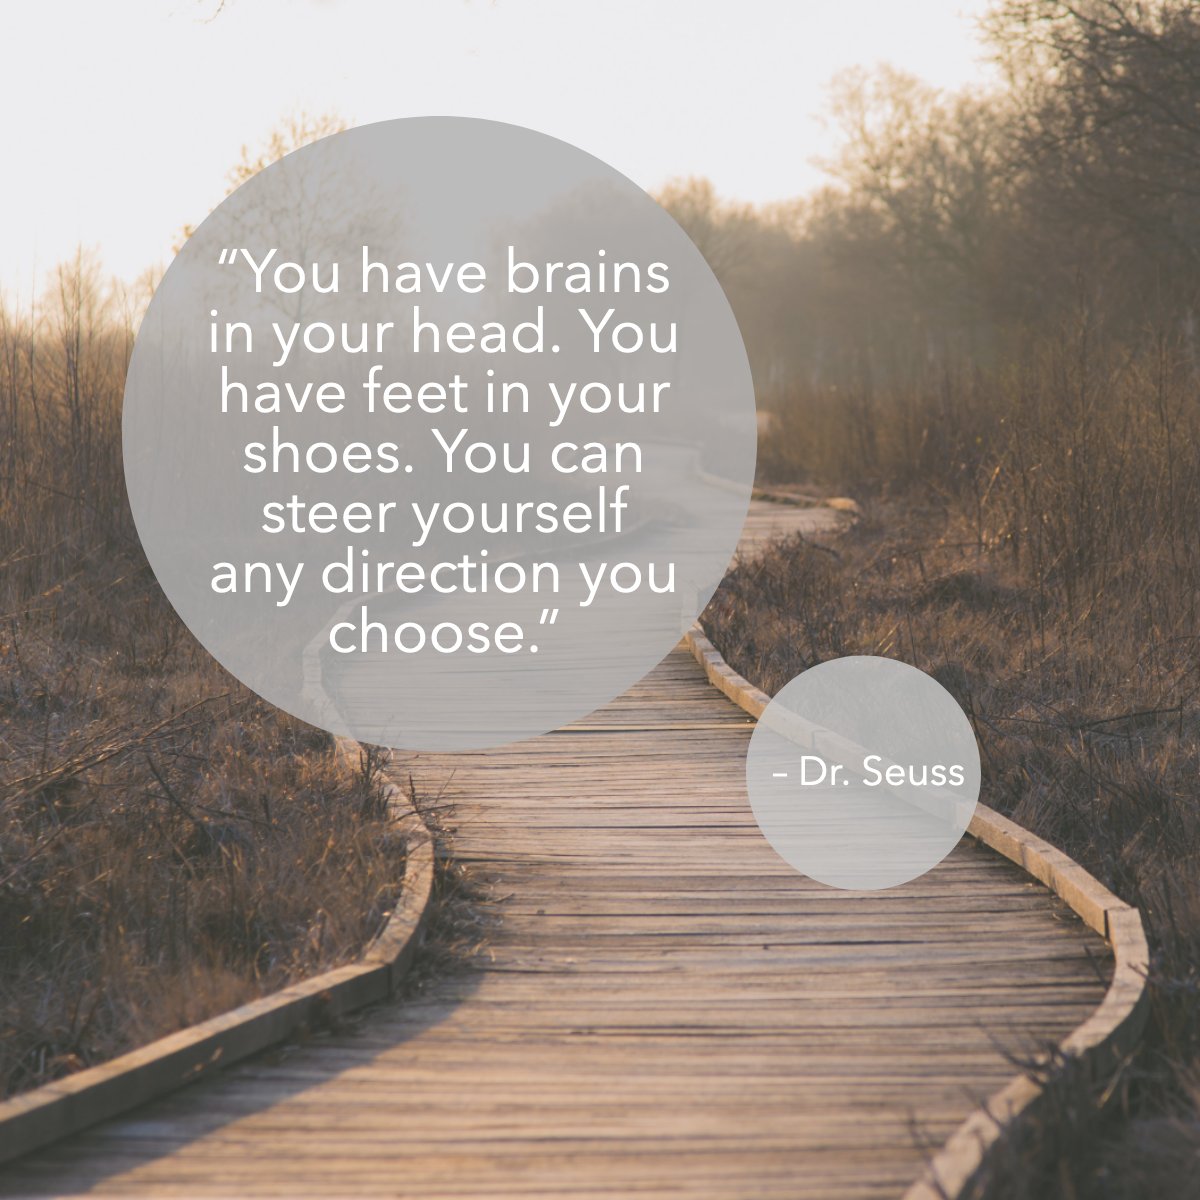 '...You can steer yourself in any direction you choose.'
—Dr. Seuss

#Drseuss #Path #Inspirational #Inspiring #Quote
#Walkaway
 #YourPerfectHome #CRayBrower #SanJoaquinCounty #StocktonCA #RealEstate